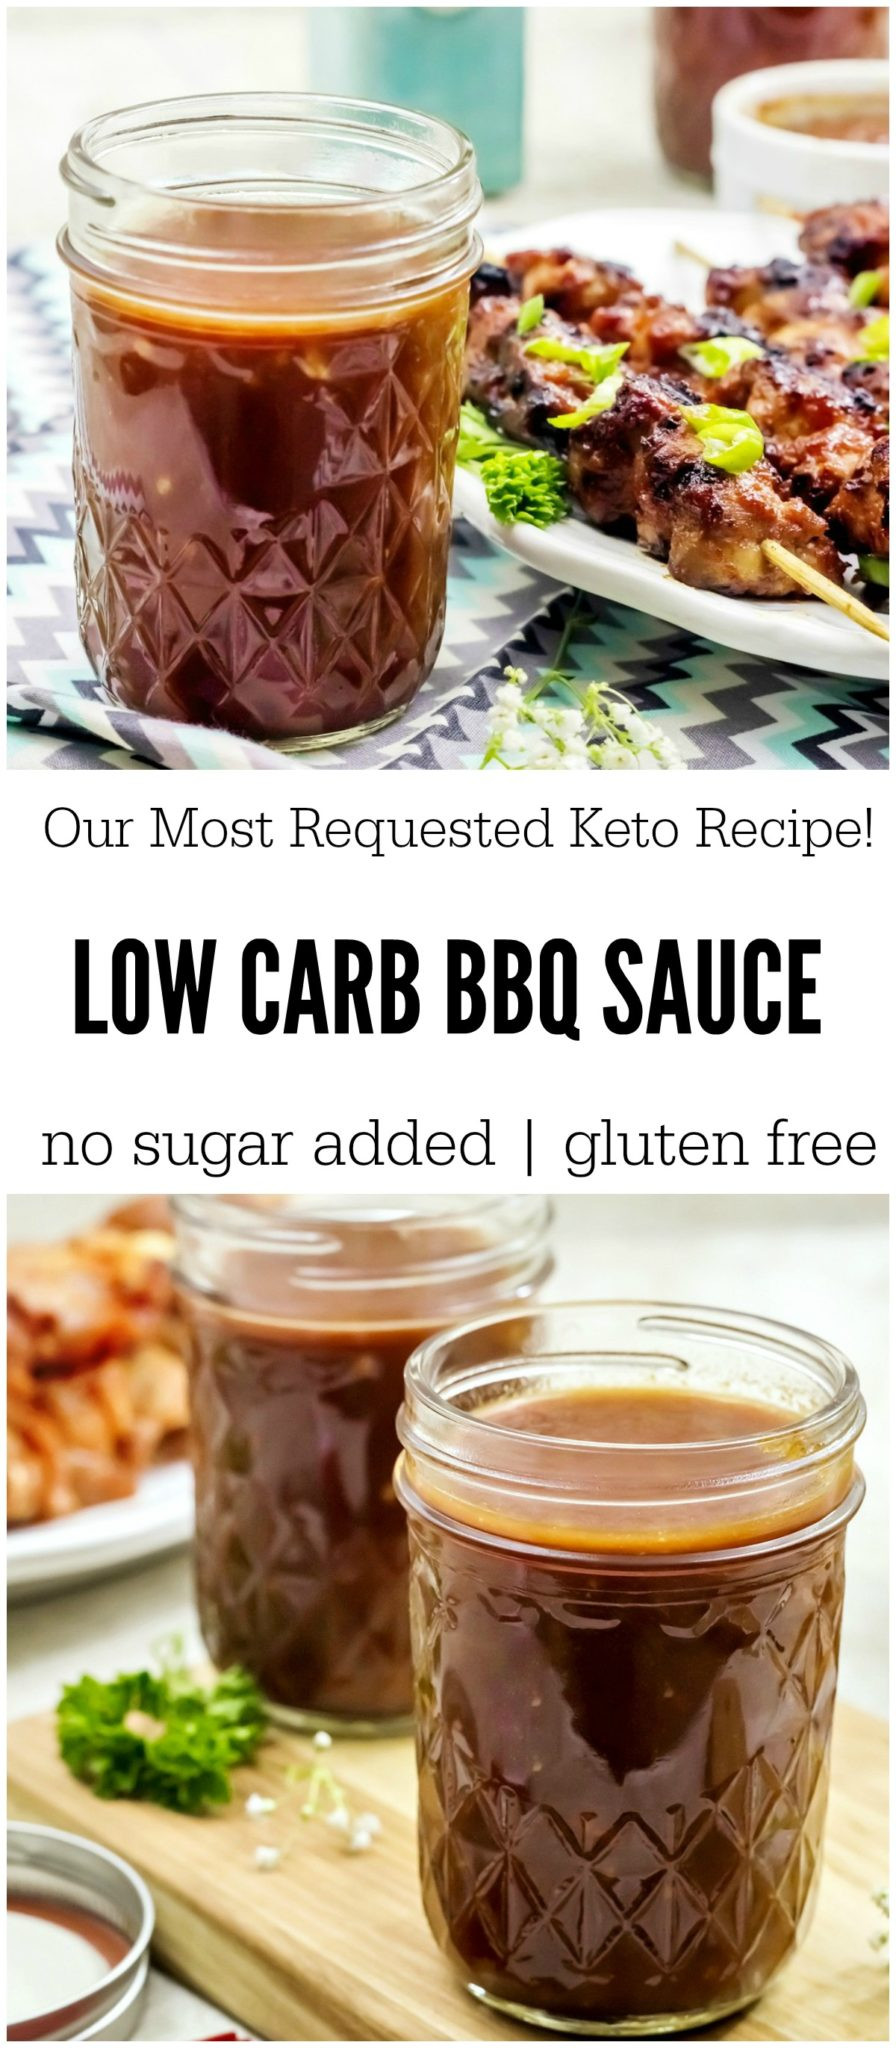 Low Carb Bbq Sauce
 Low Carb BBQ Sauce Our Most Requested Keto Friendly Recipe